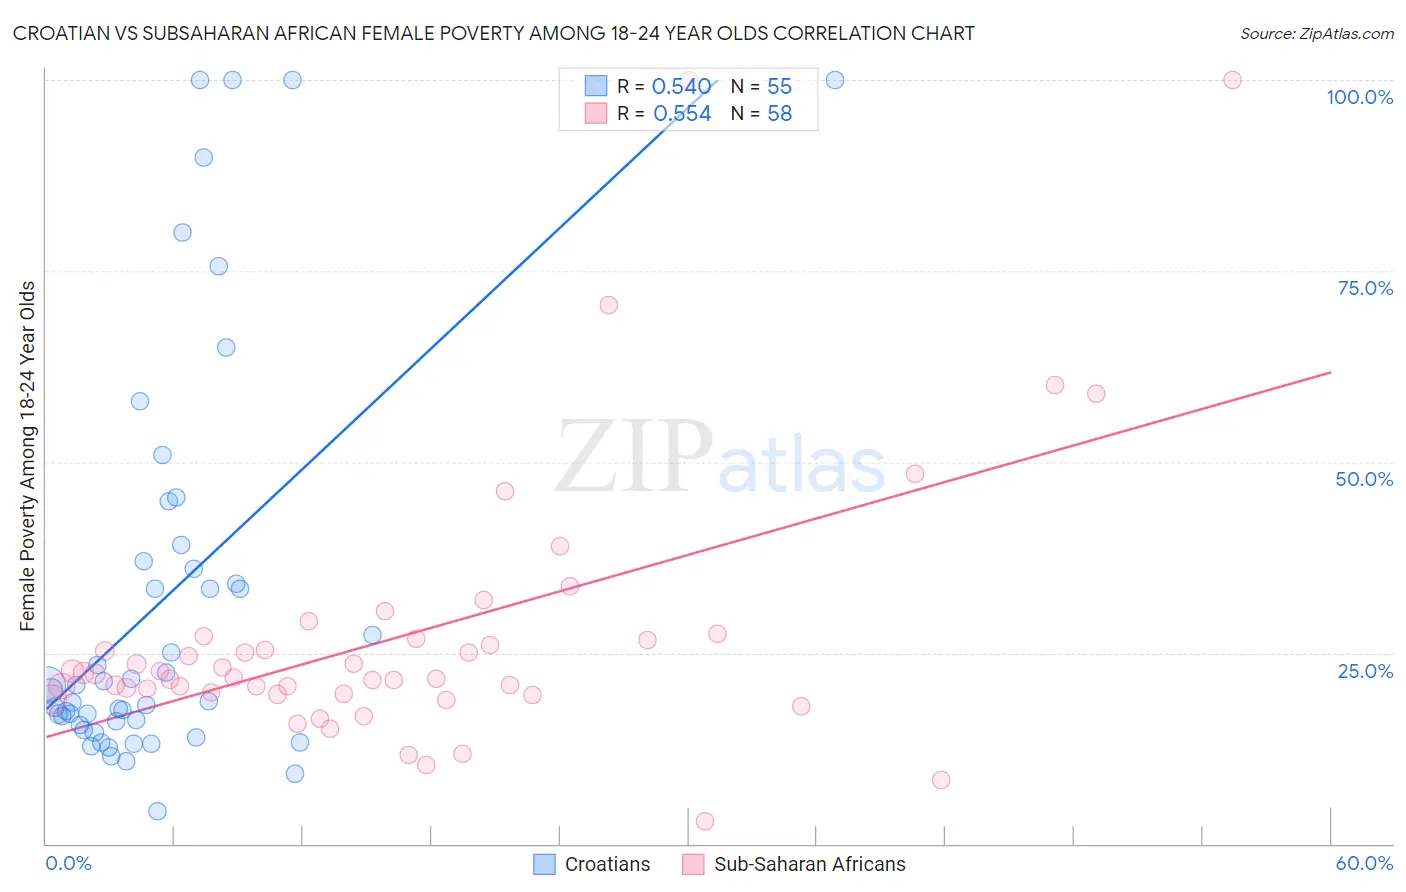 Croatian vs Subsaharan African Female Poverty Among 18-24 Year Olds